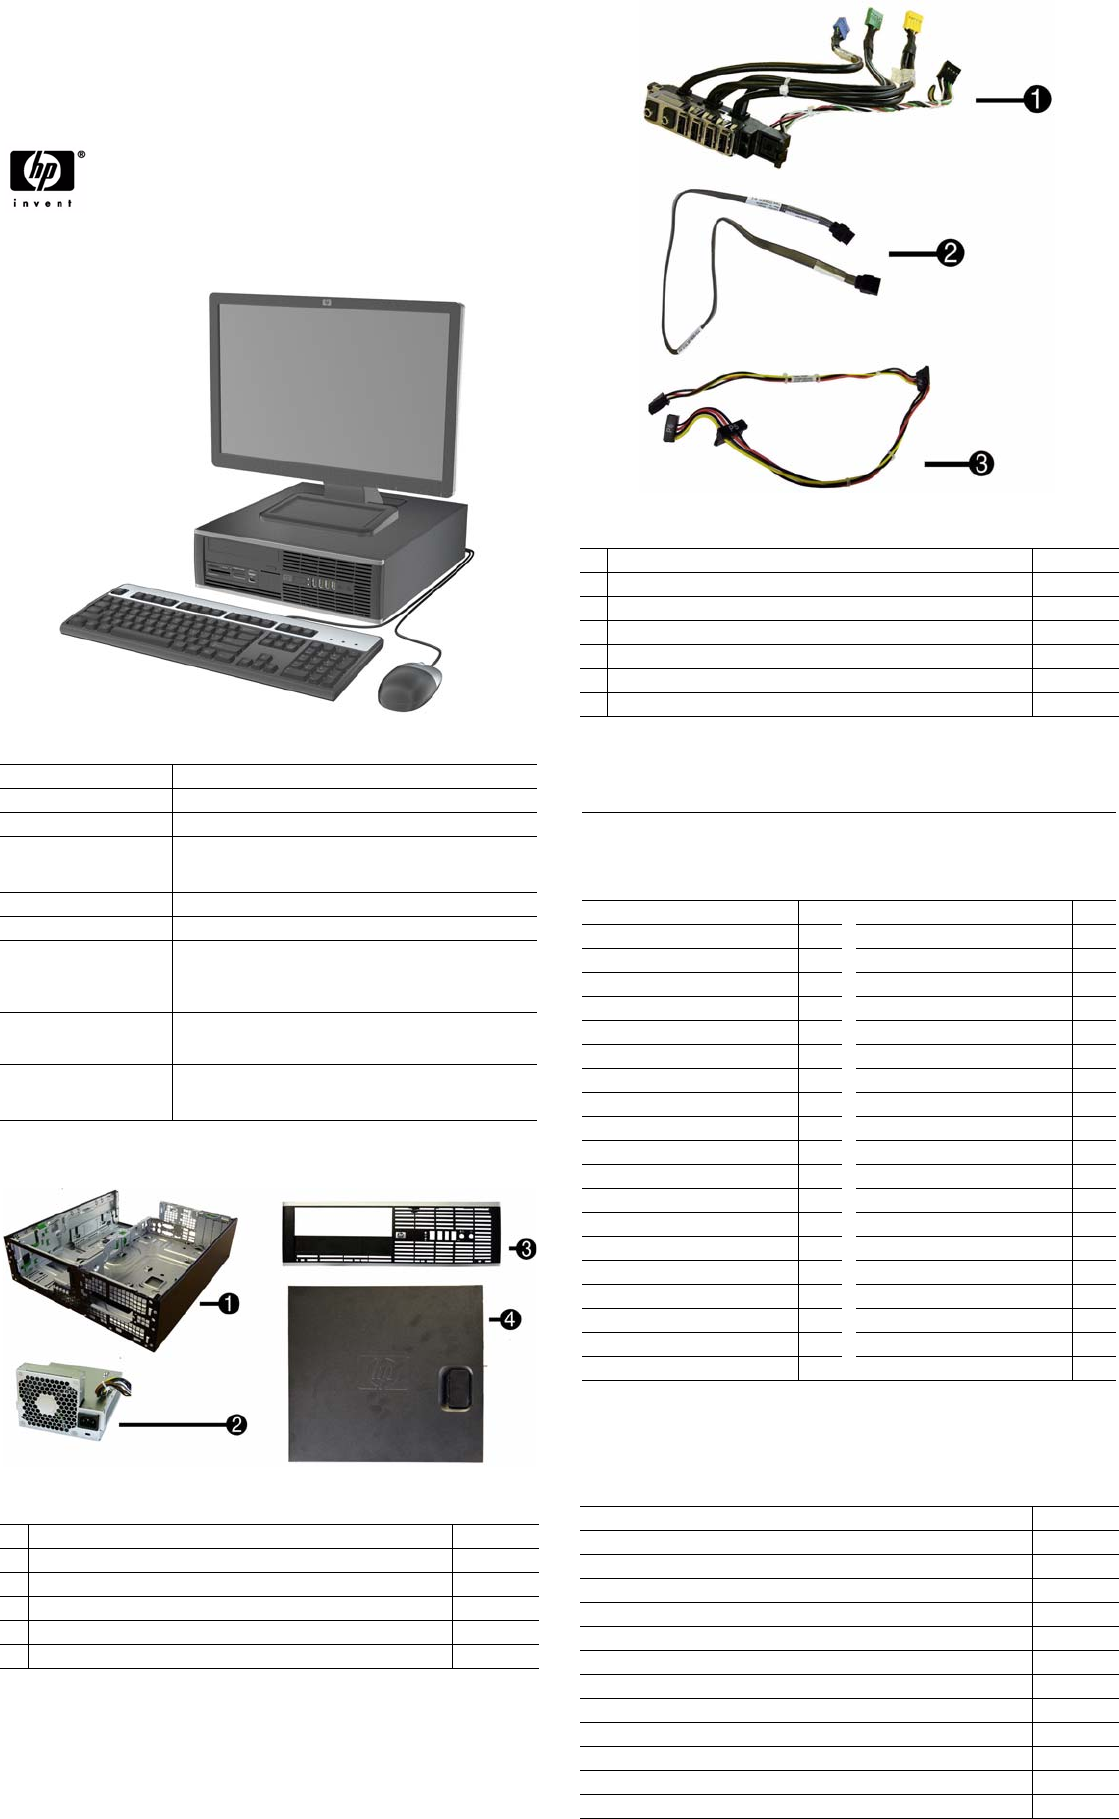 Hp Compaq 6000 Pro Small Form Factor Pc Service And Maintain